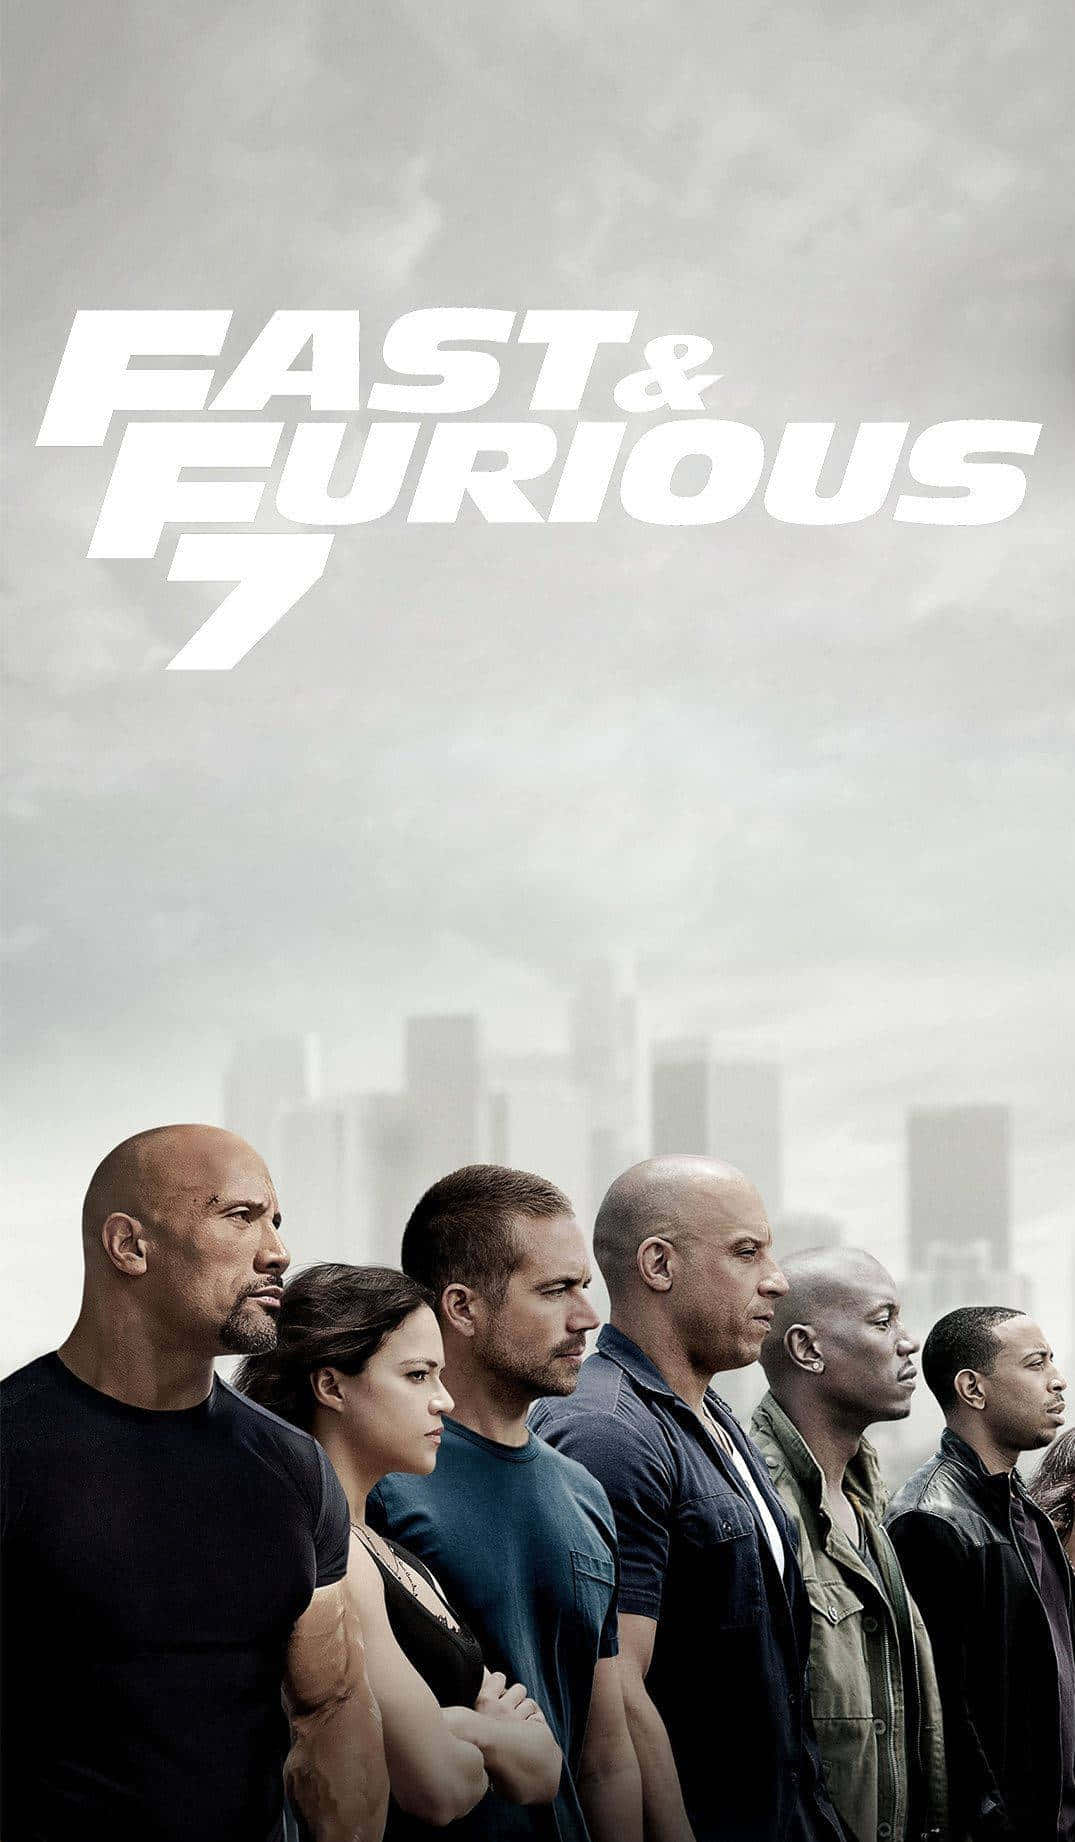 Get the ultimate Fast and Furious experience with the new Iphone Wallpaper